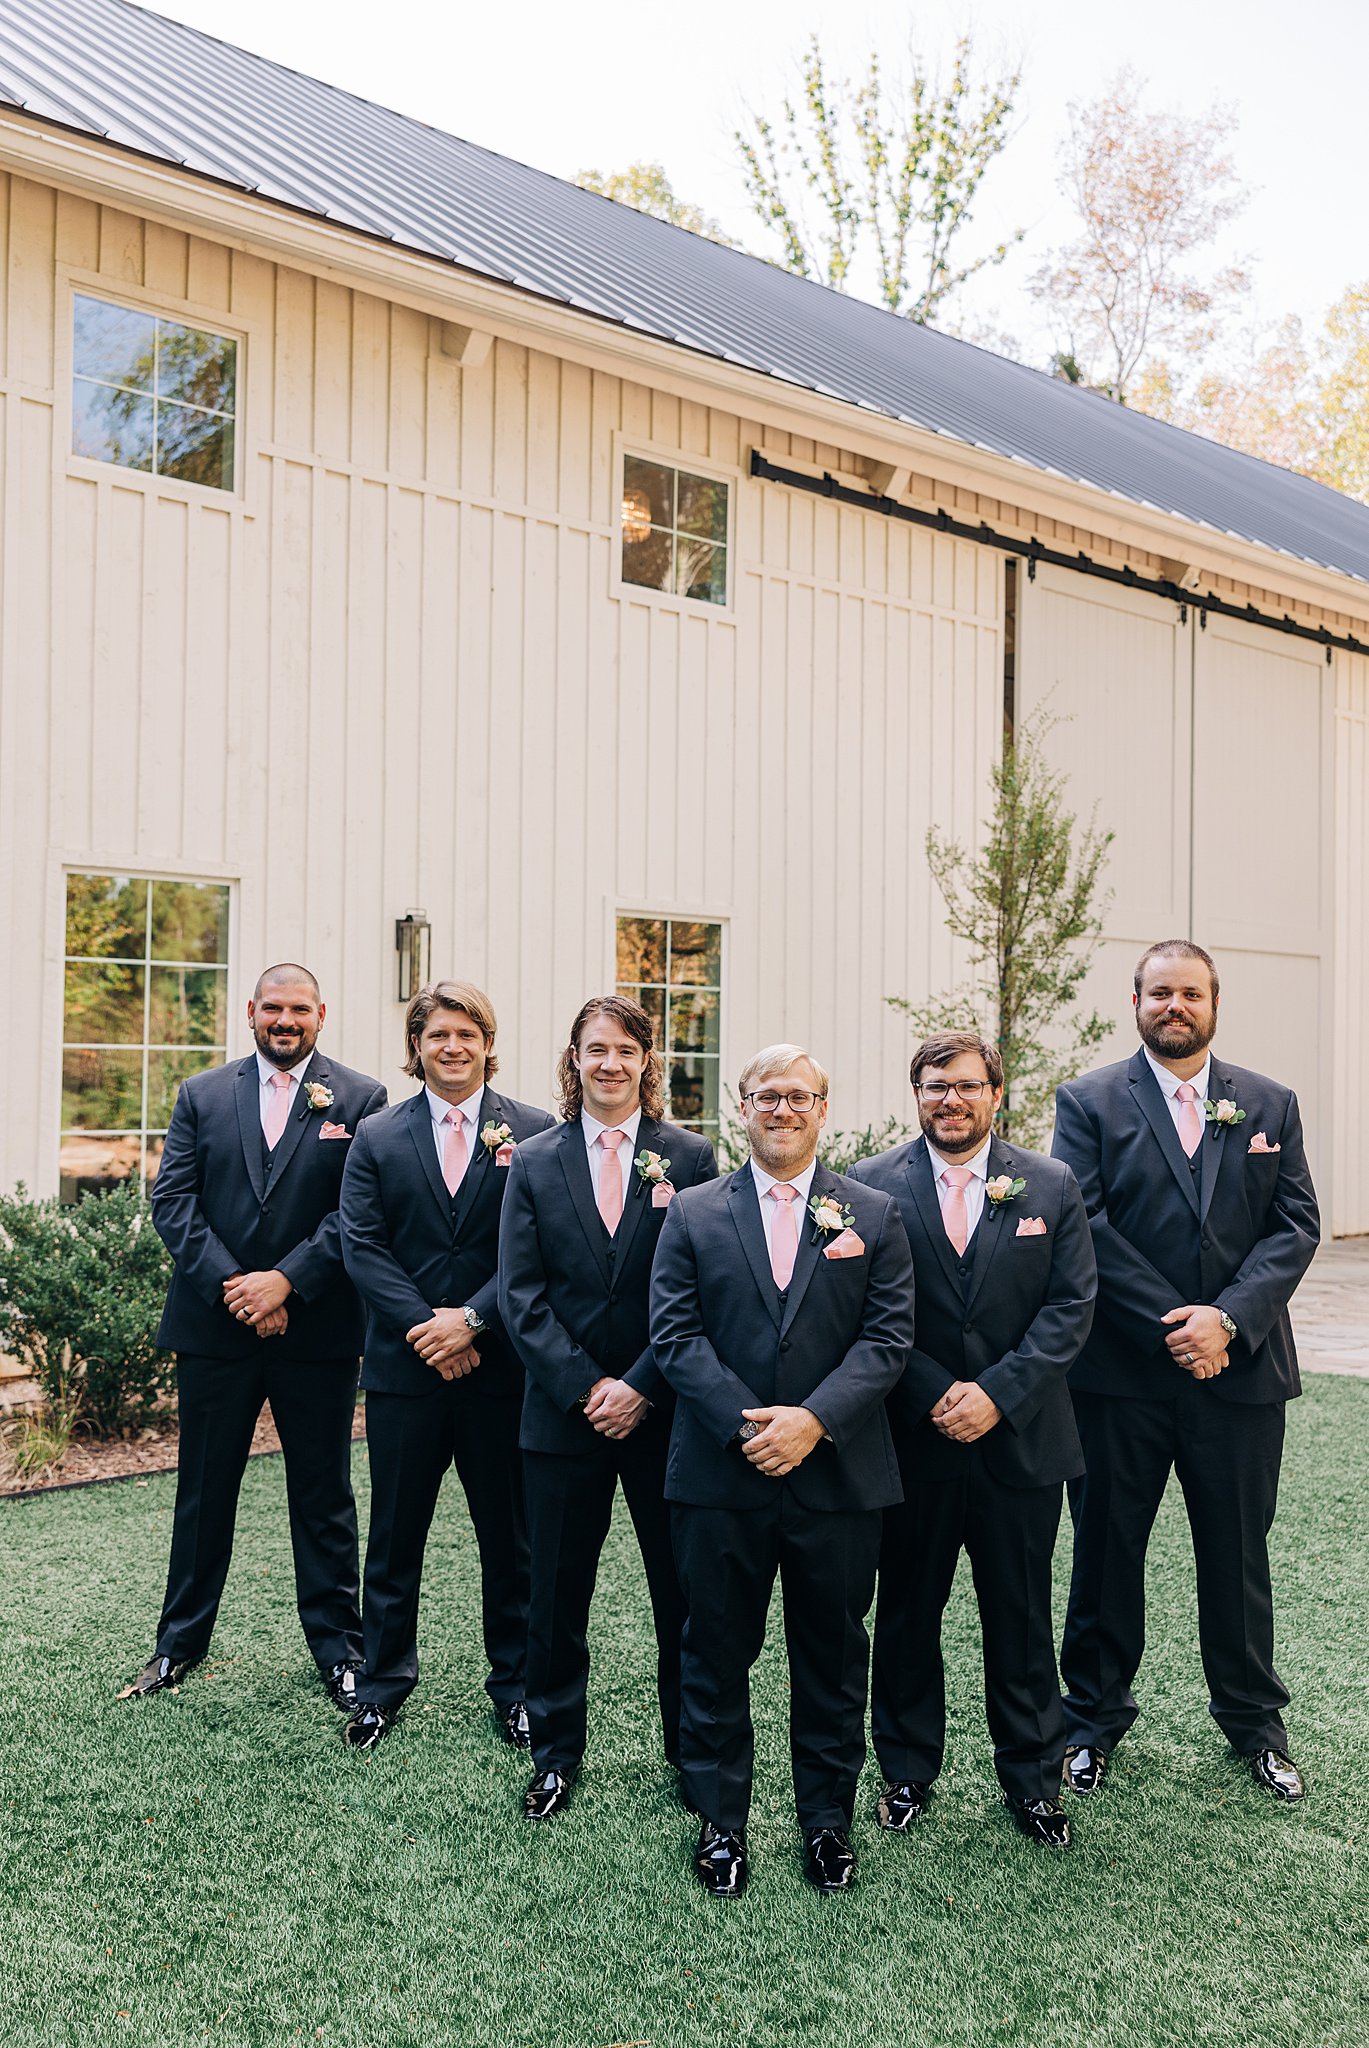 A groom in a black suit stands with his groomsmen in a garden lawn with hans folded in front